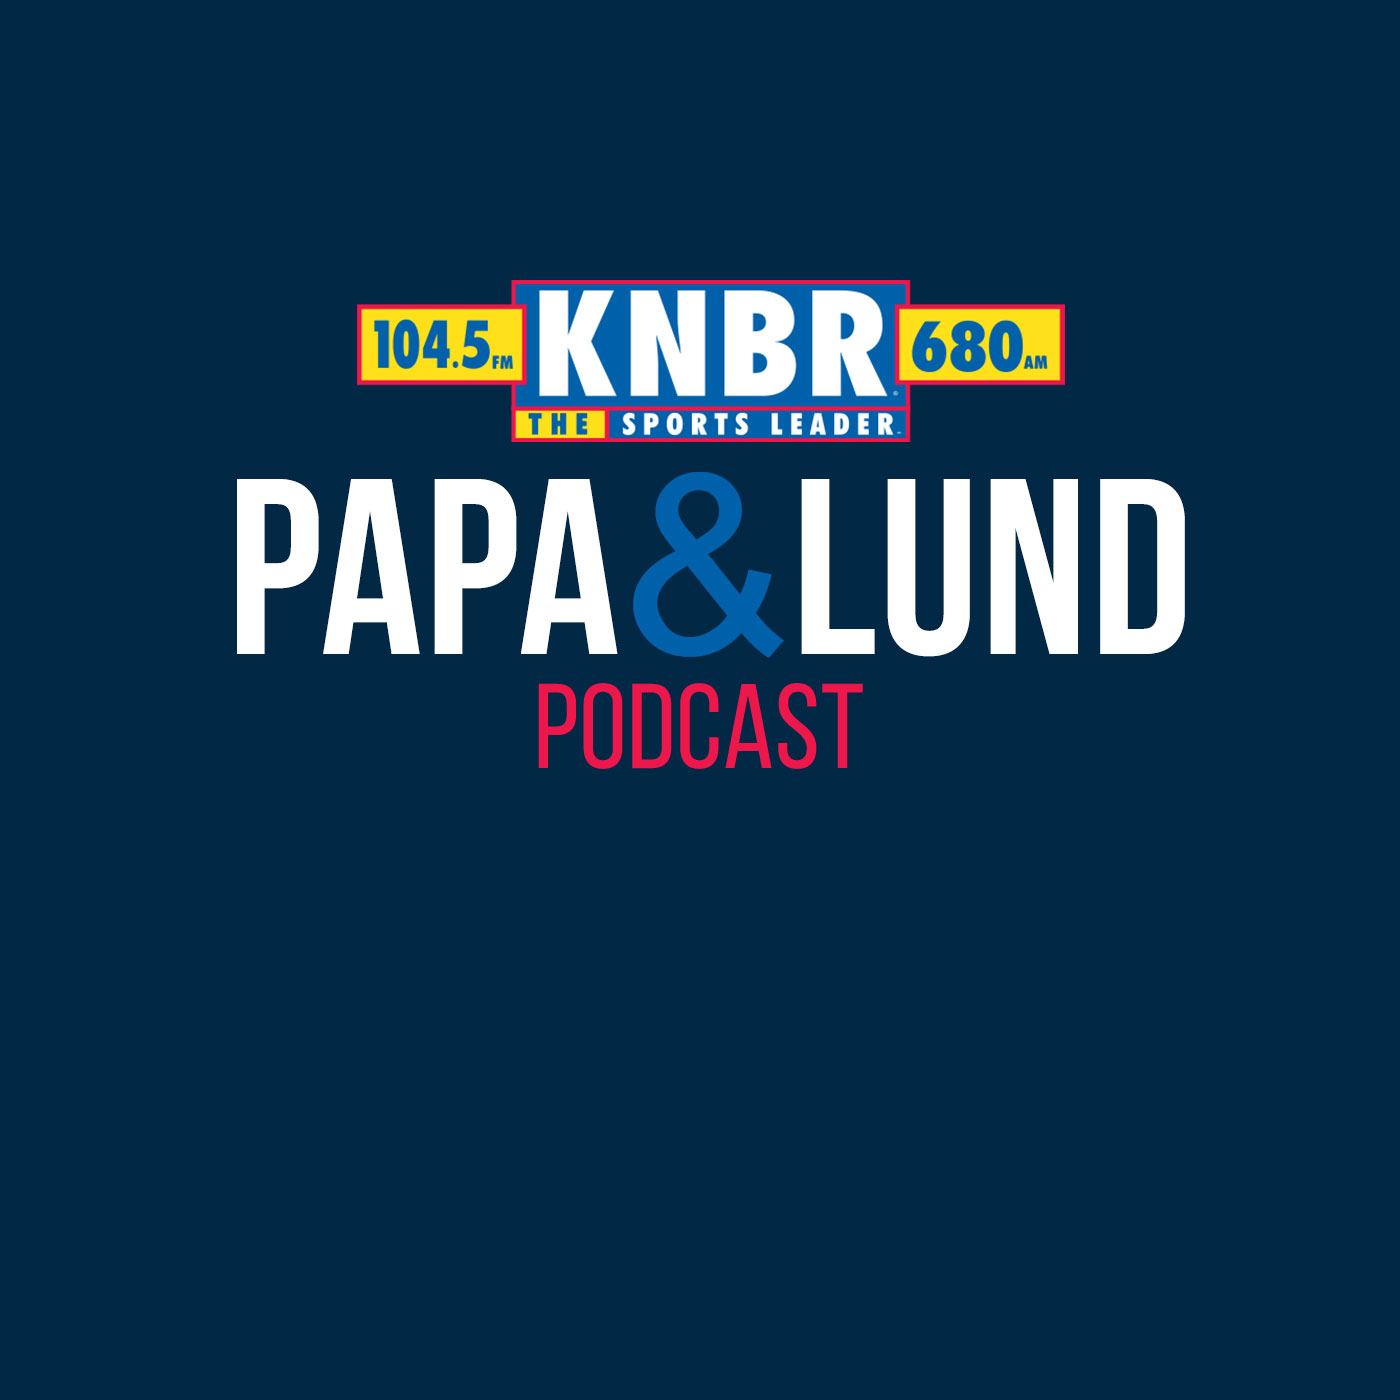 4-15 Susuan Slusser joins Papa & Lund to discuss the lackluster start to the Giants Florida roadtrip and how they can try to get on track in Miami